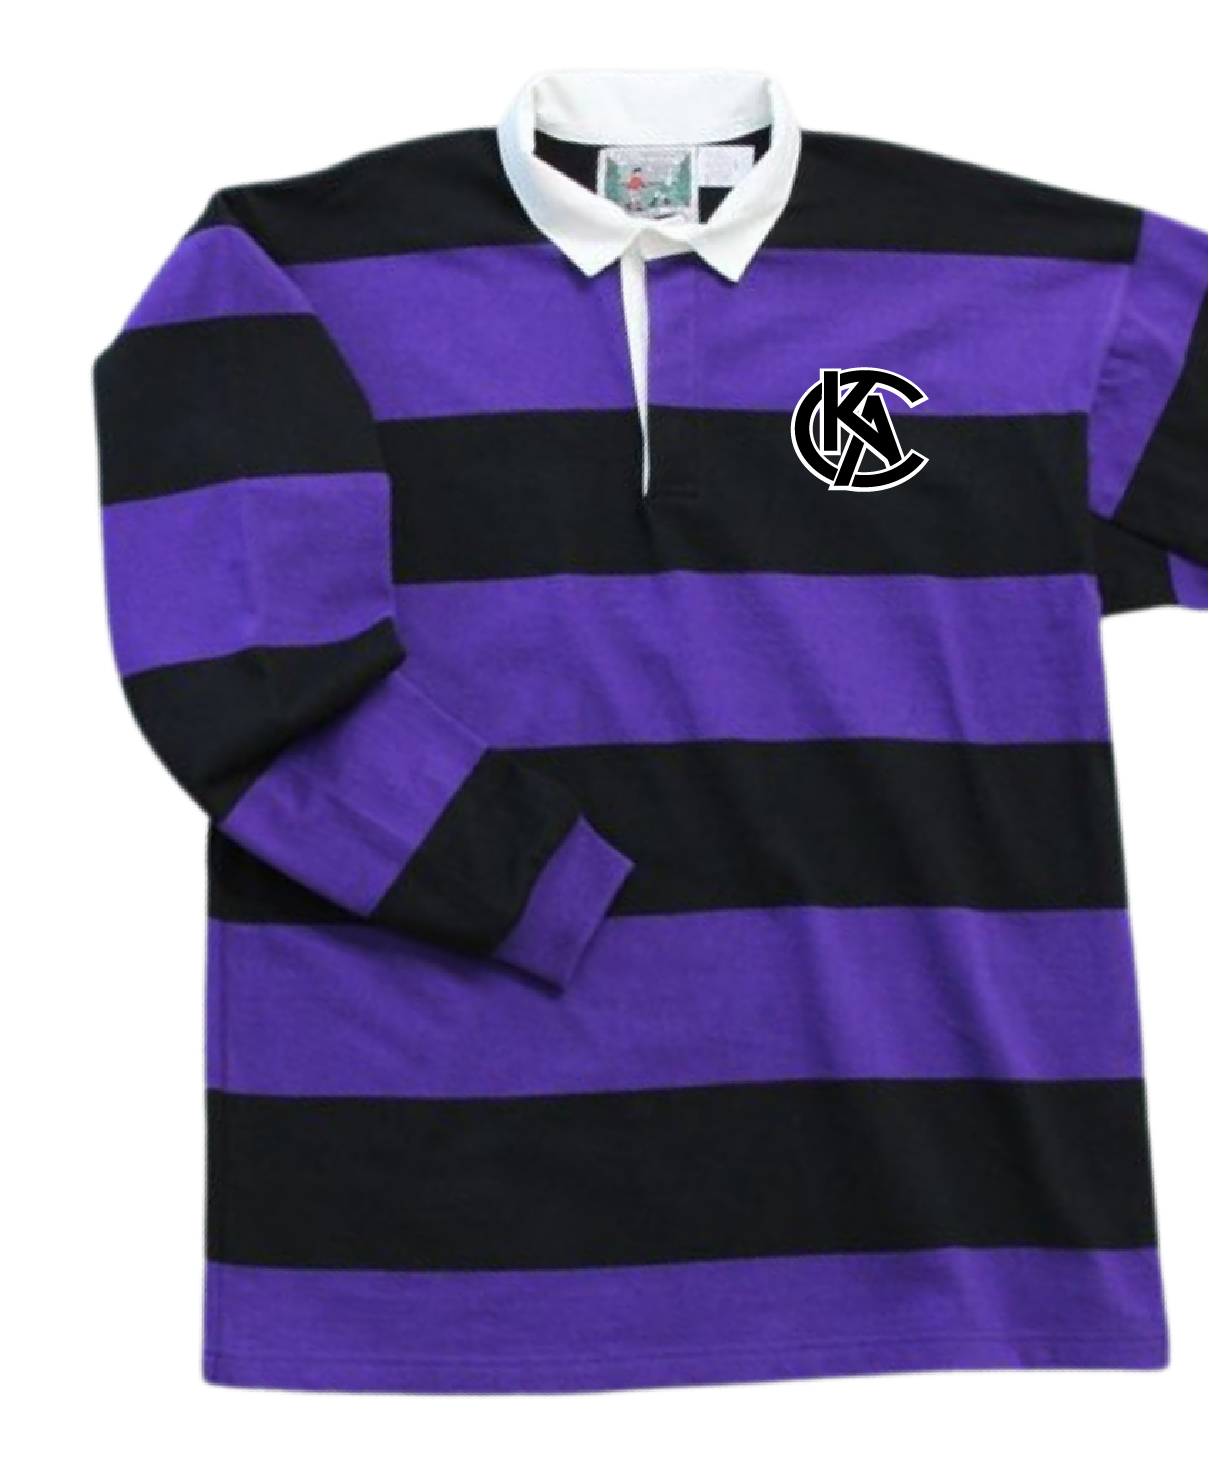 KAC Rugby Stripe Shirt *LIMITED EDITION*